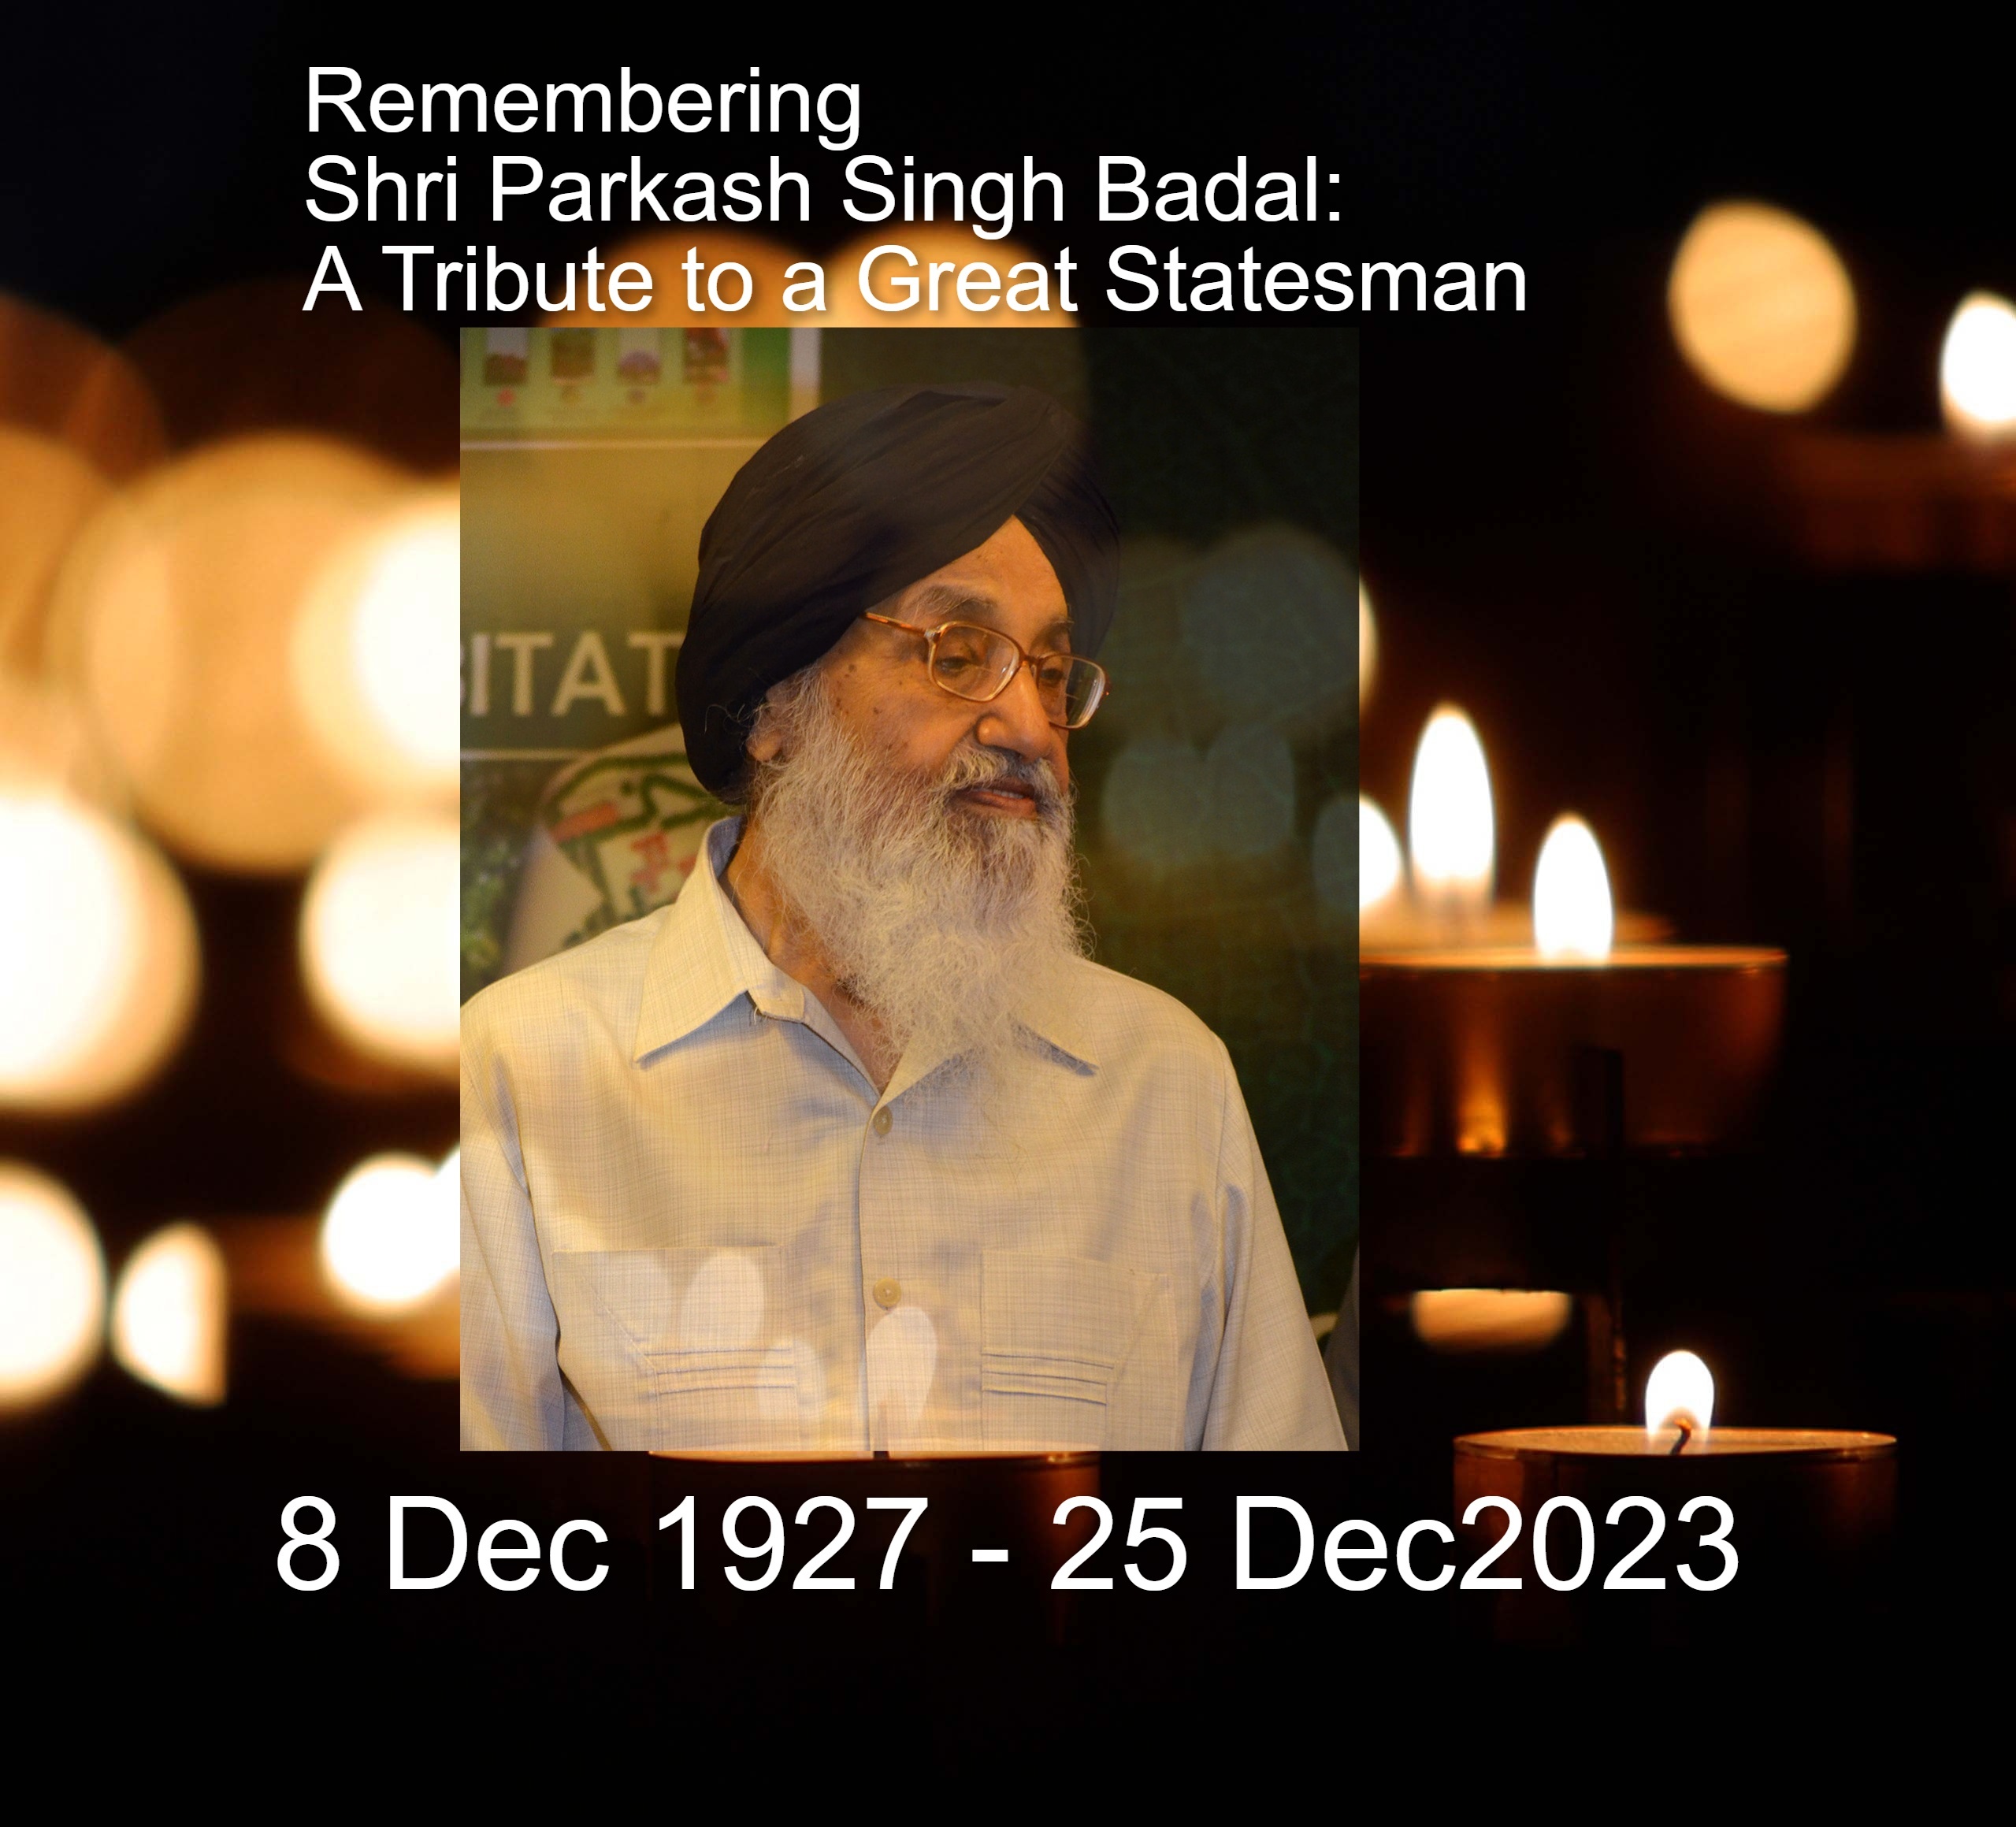 You are currently viewing Remembering Shri Parkash Singh Badal: A Tribute to a Great Statesman